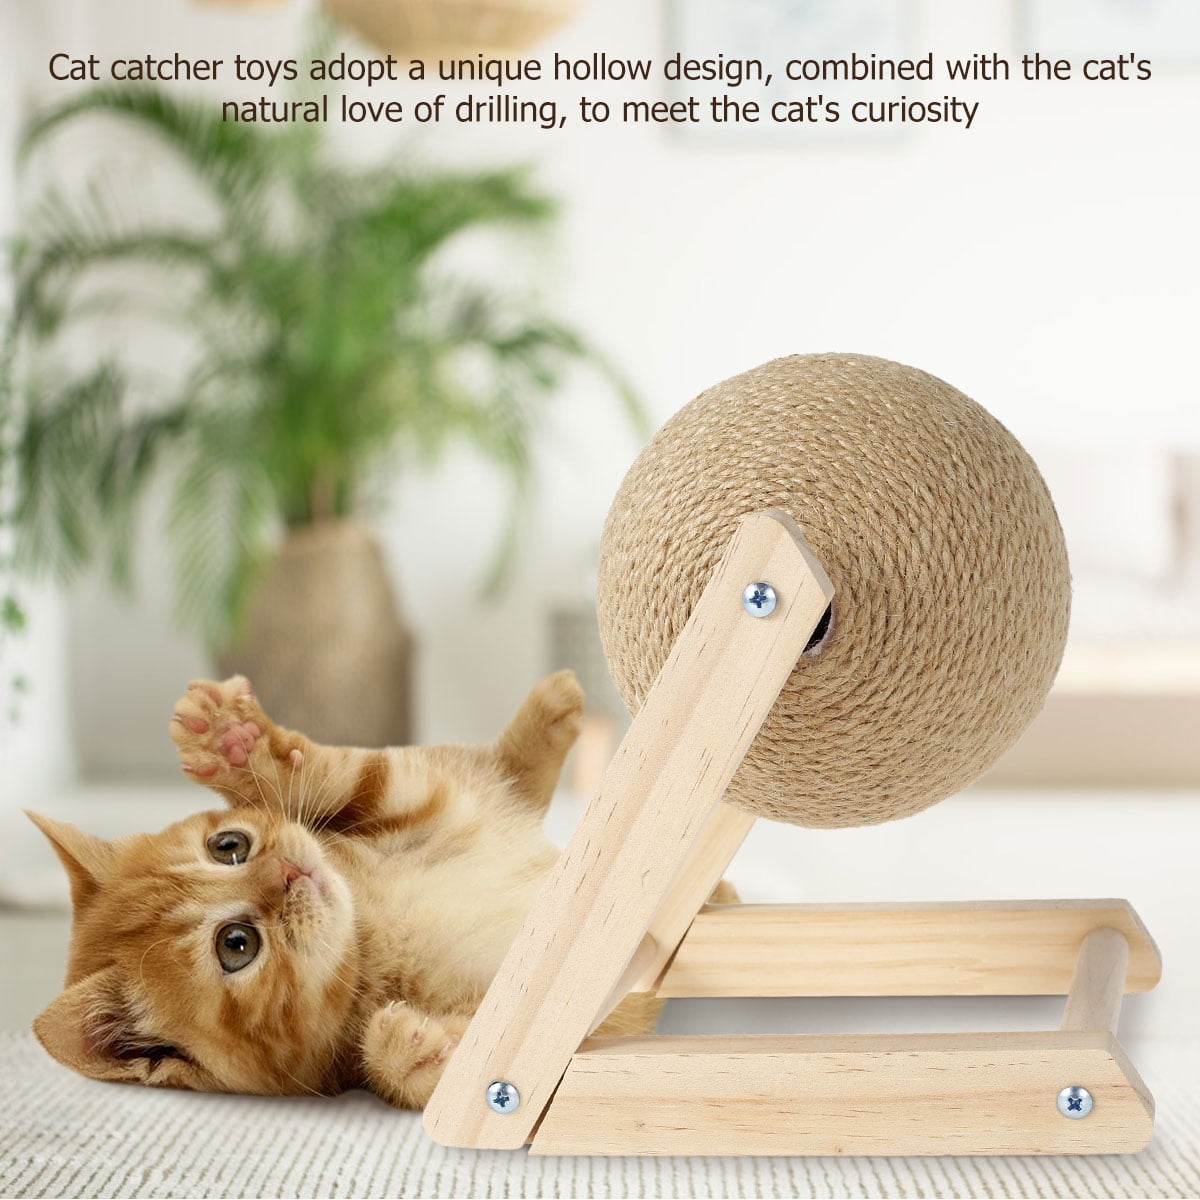 Hardlegix Cat Scratching Ball Toy Natural Sisal Cat Scratcher Durable Cat Scratcher for Cat Nails Interactive Pet Toy, Size: 8.66*7.09*6.3, Beige